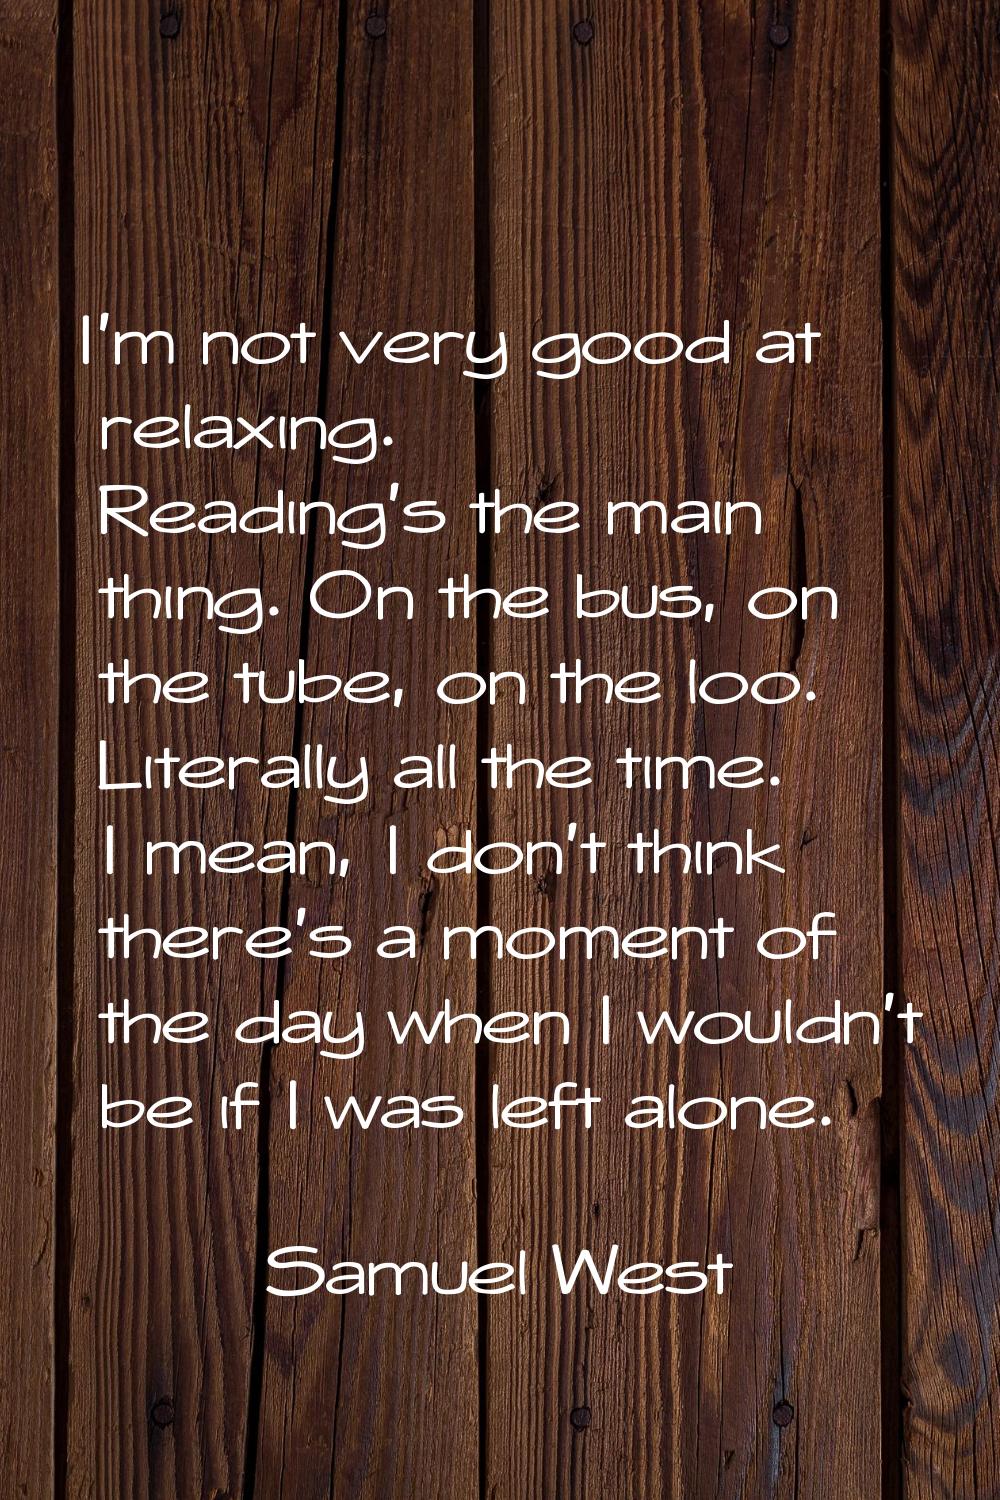 I'm not very good at relaxing. Reading's the main thing. On the bus, on the tube, on the loo. Liter